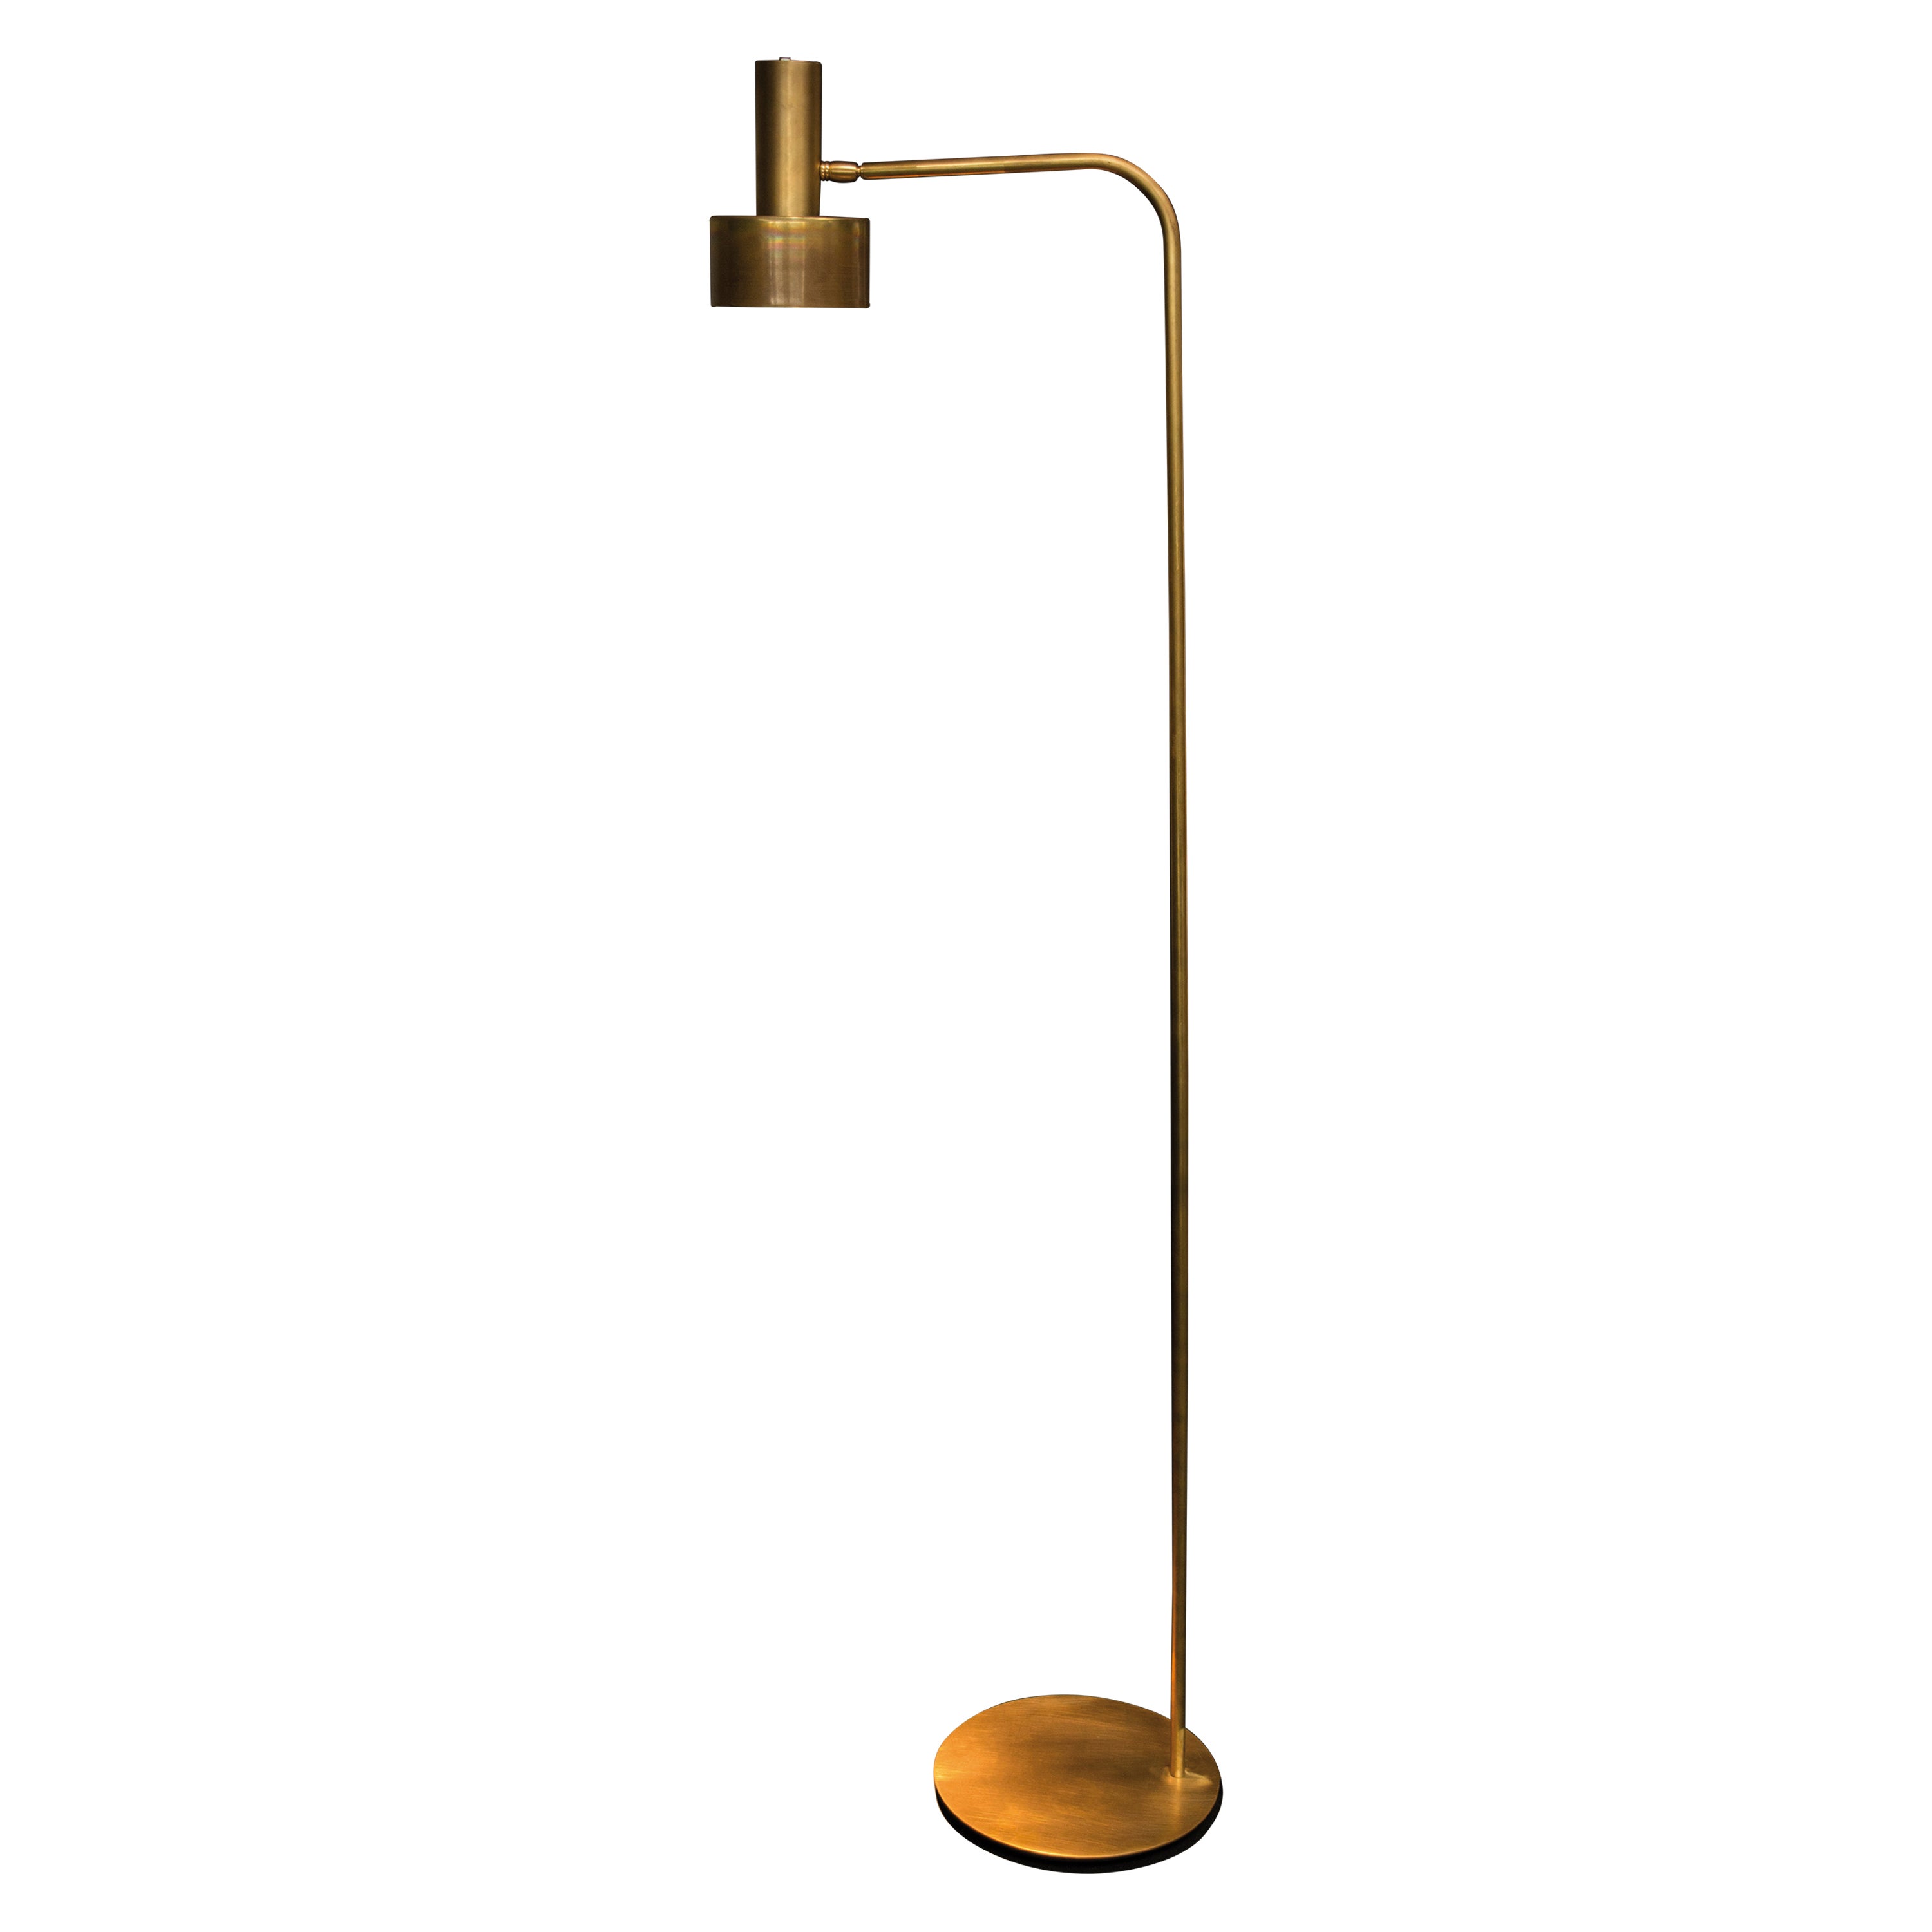 Natural Brass Contemporary-Modern Floor Lamp Handcrafted in Italy by 247lab